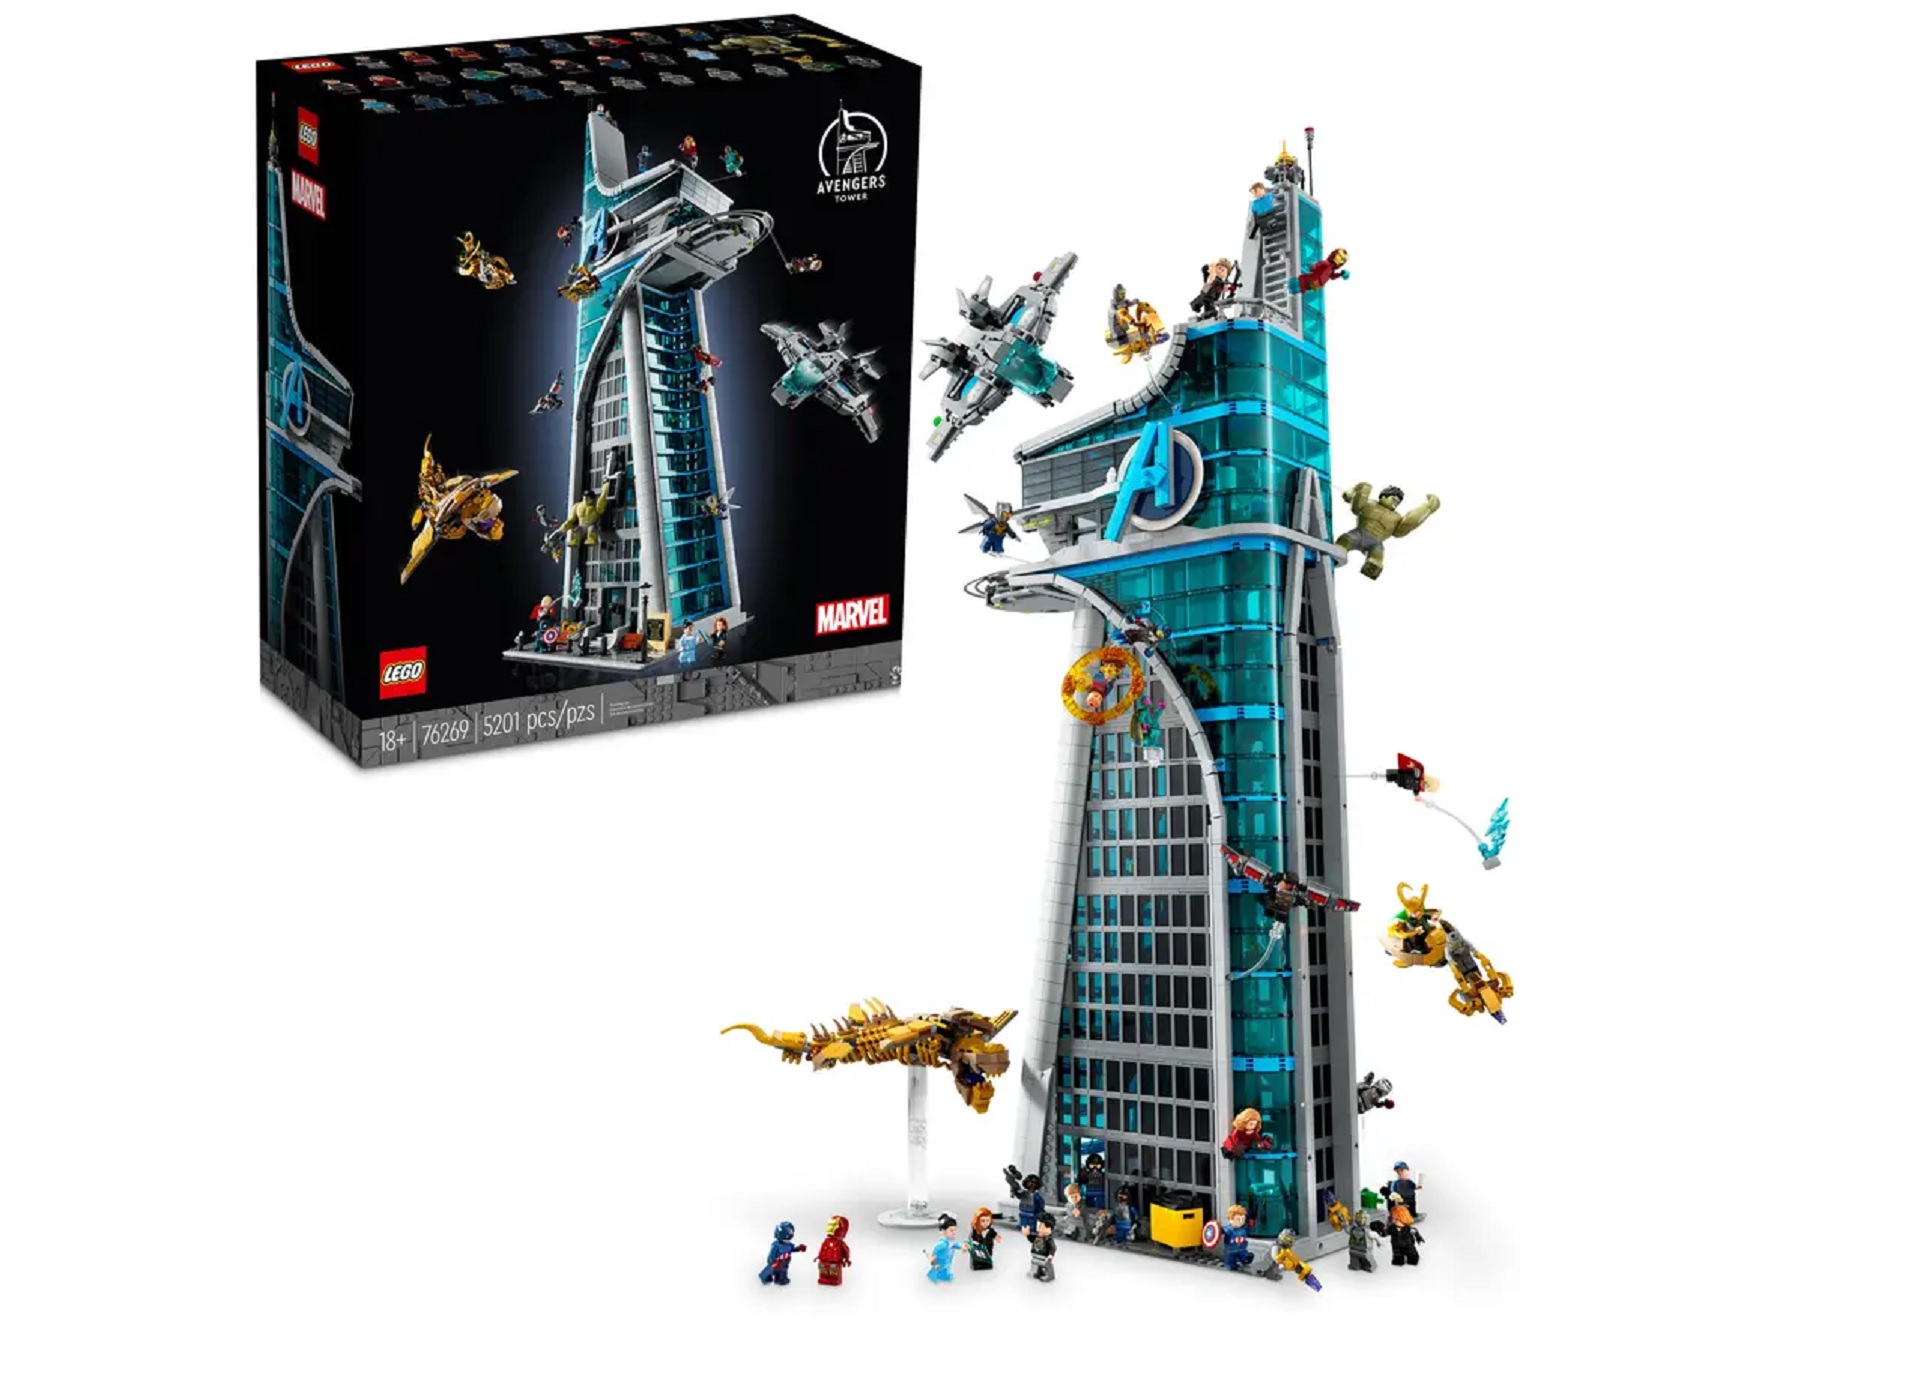 Lego unveils epic Marvel Avengers Tower set with Black Friday deals and offers for Insiders Space